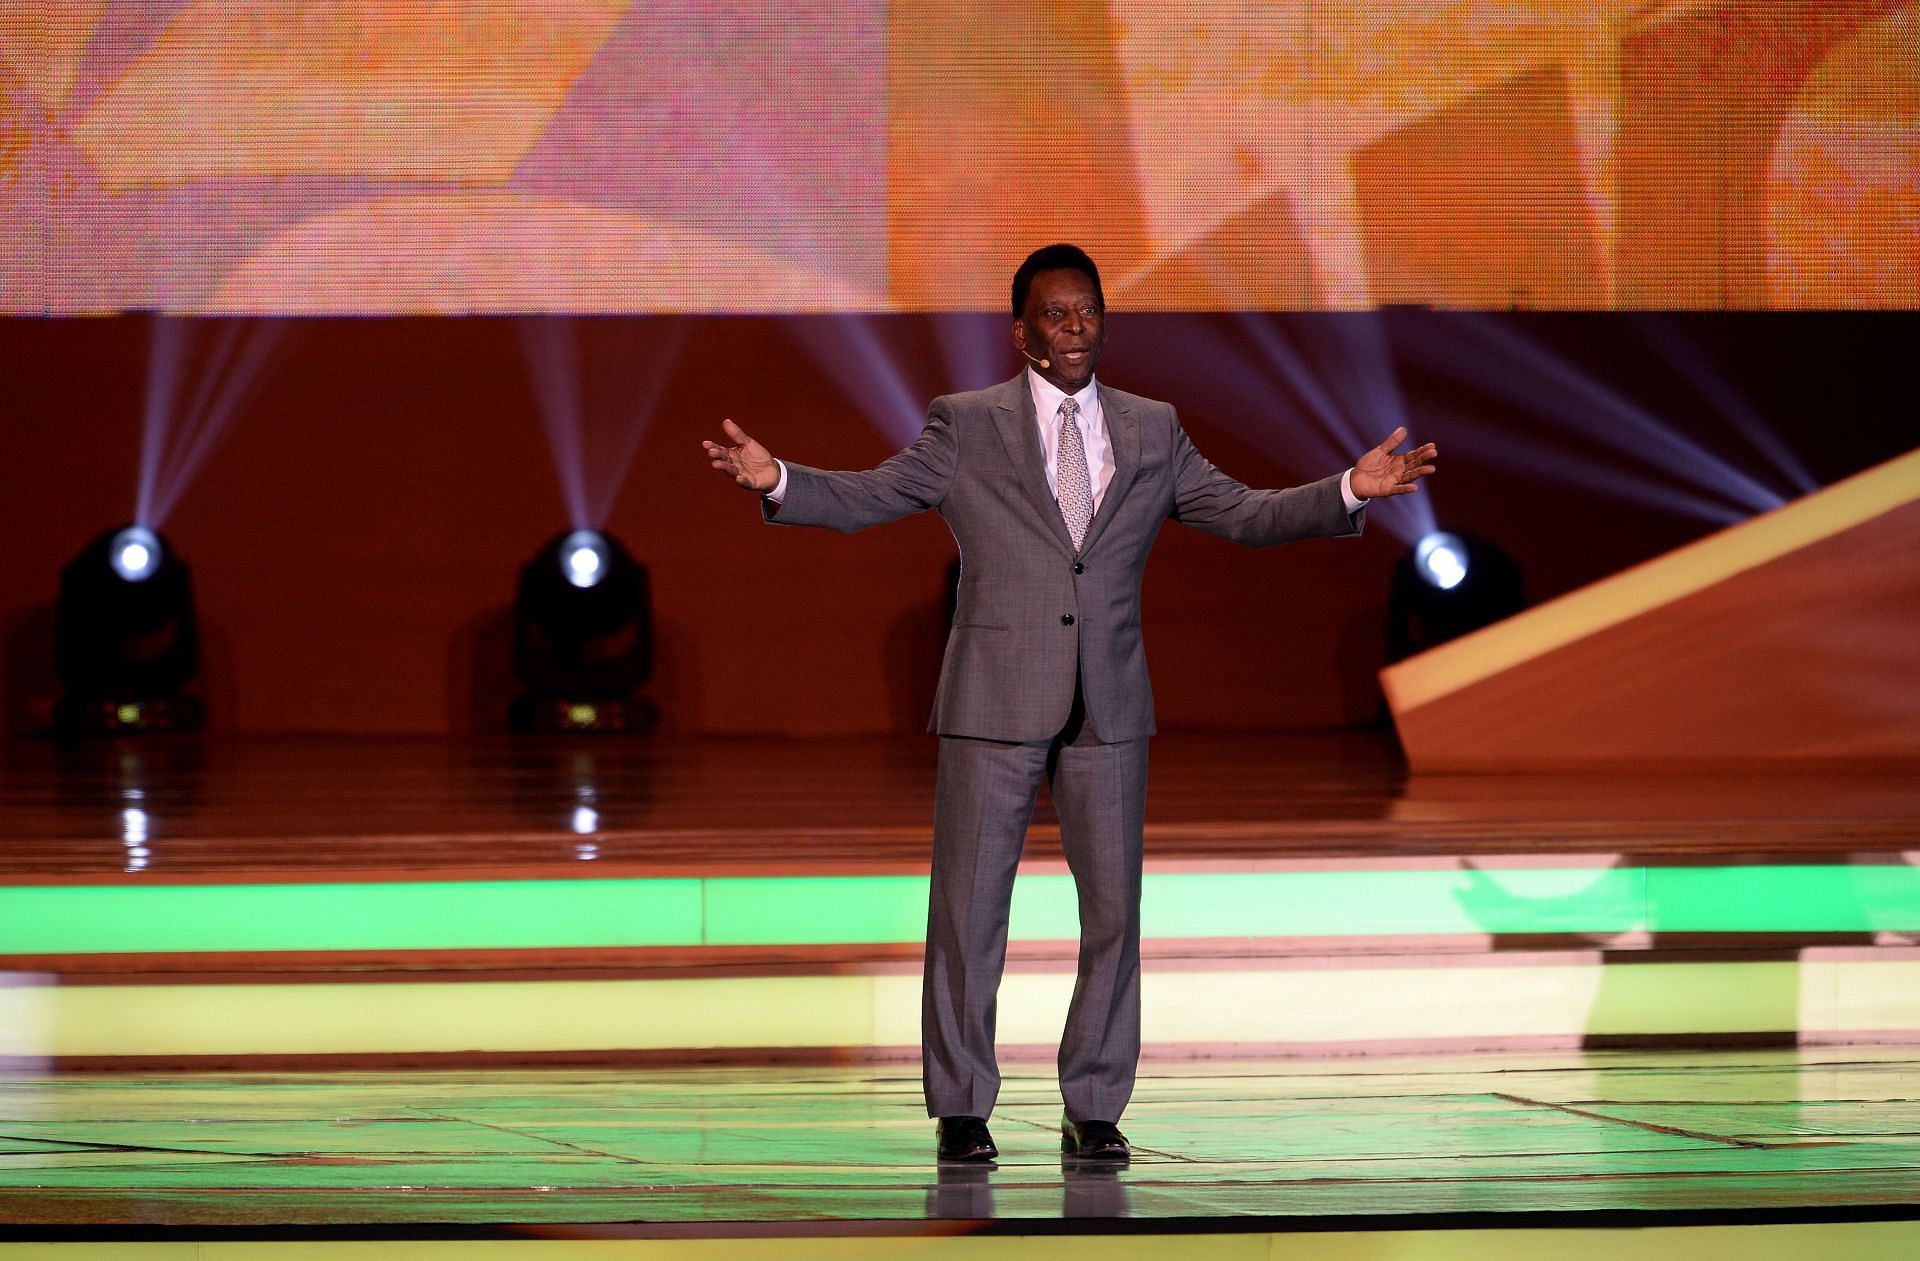 Pele at 2014 FIFA World Cup Final Draw